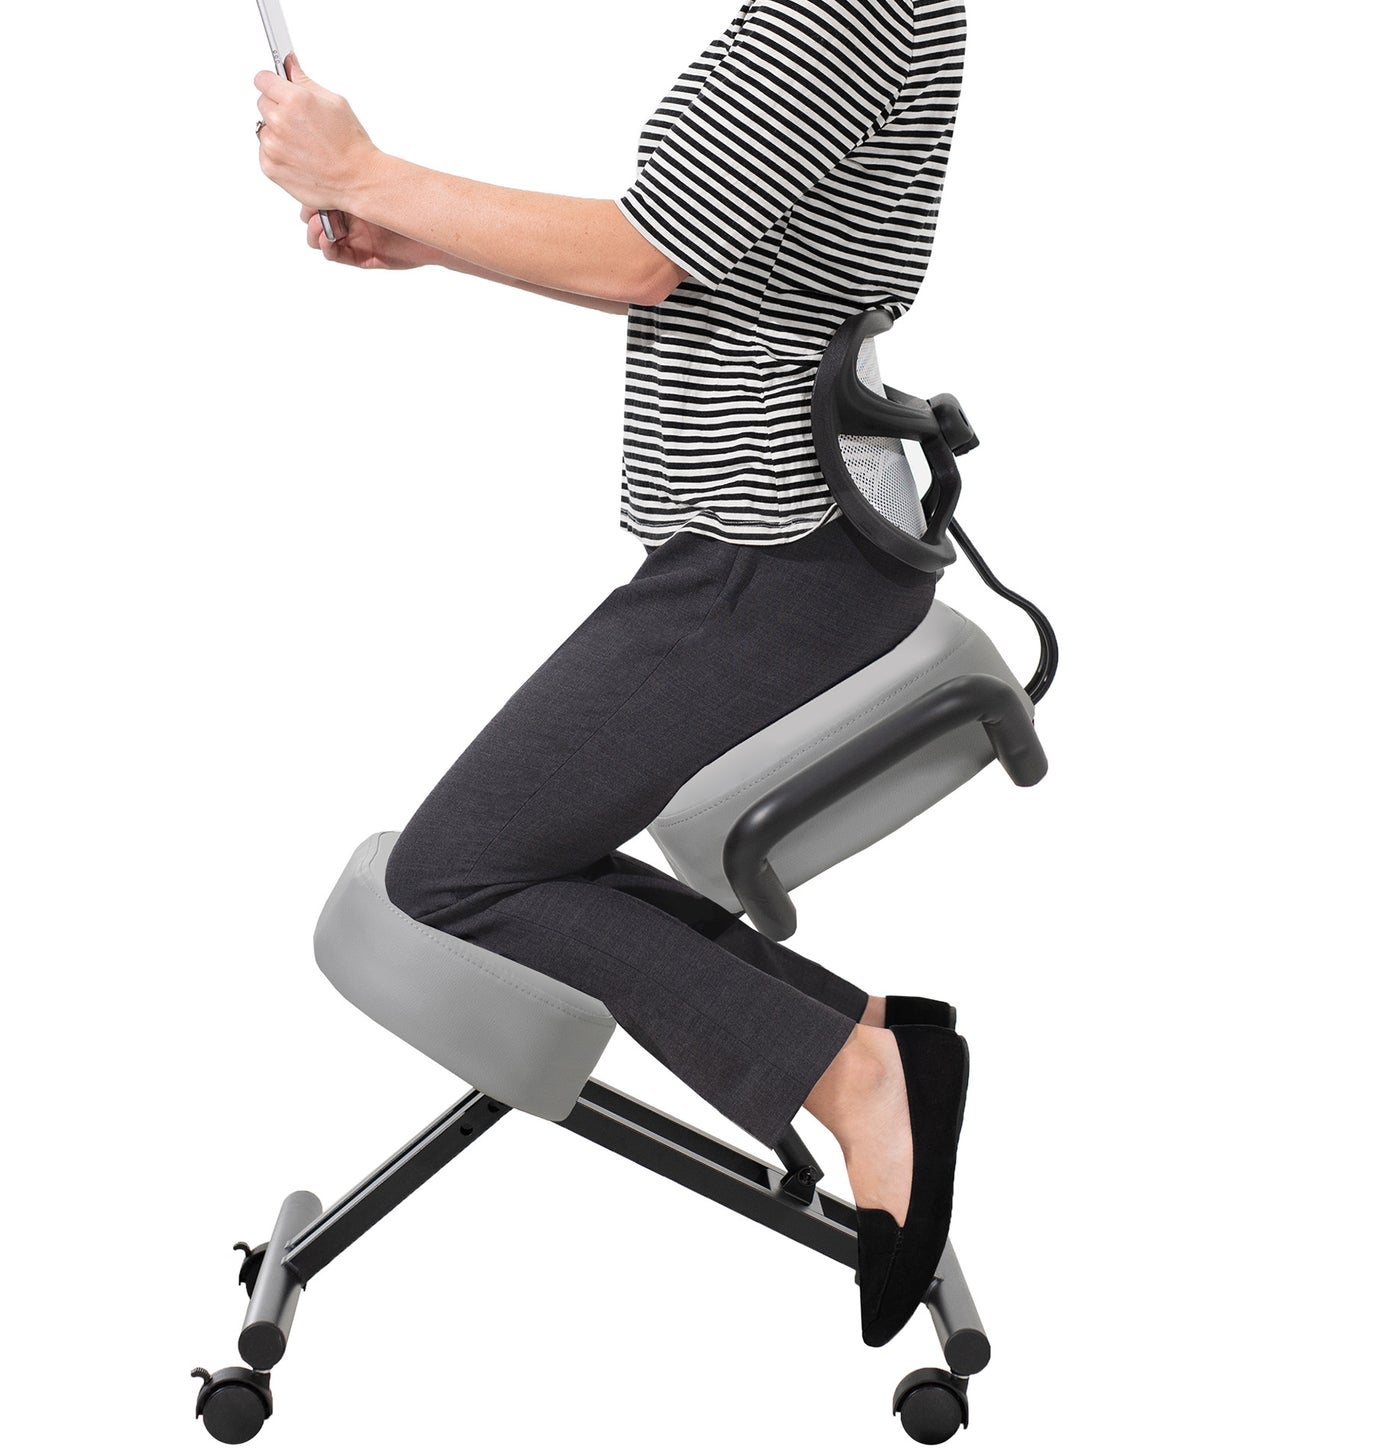 This Ultimate Office Chair Has a Laptop Mount, Leg Rests, and a